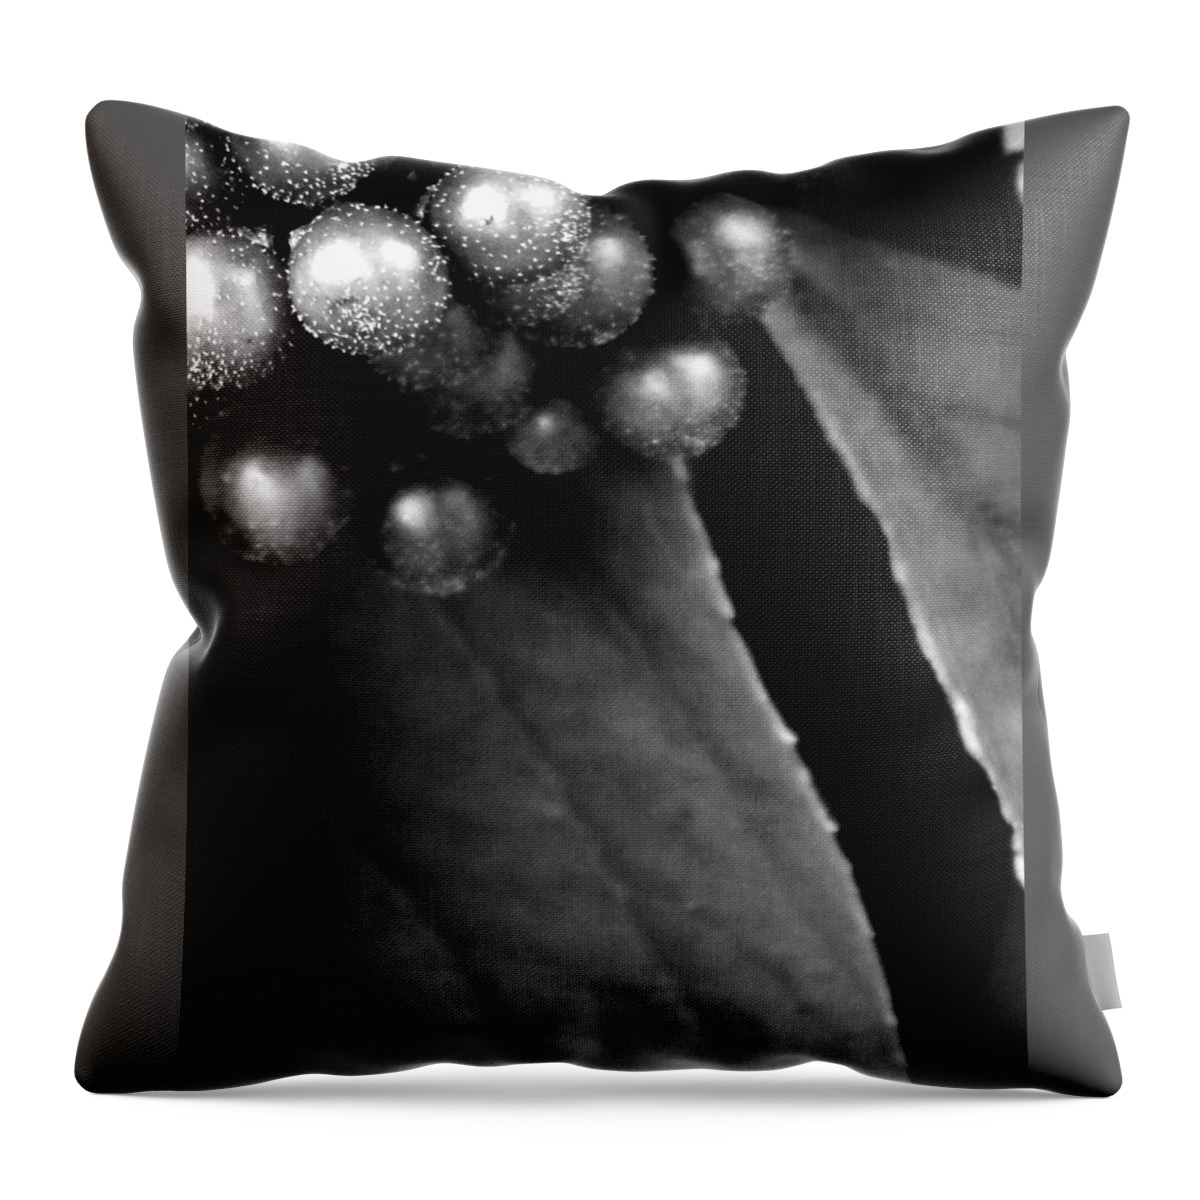 Plants Throw Pillow featuring the photograph Dark Berry by Michael Ramsey